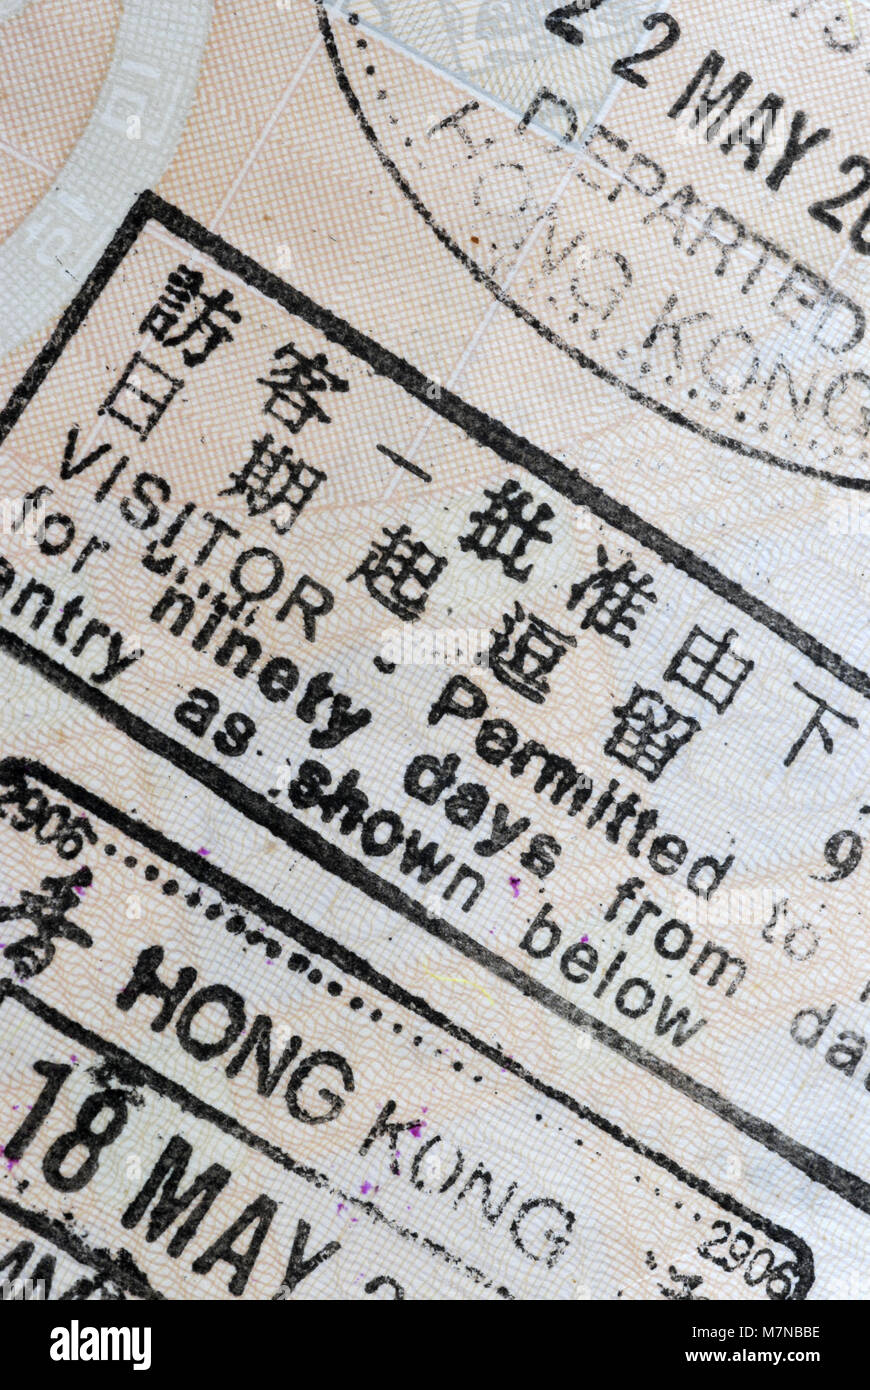 Macro of part of a Hong Kong visitor permit taken from the inside page of an asian passport Stock Photo